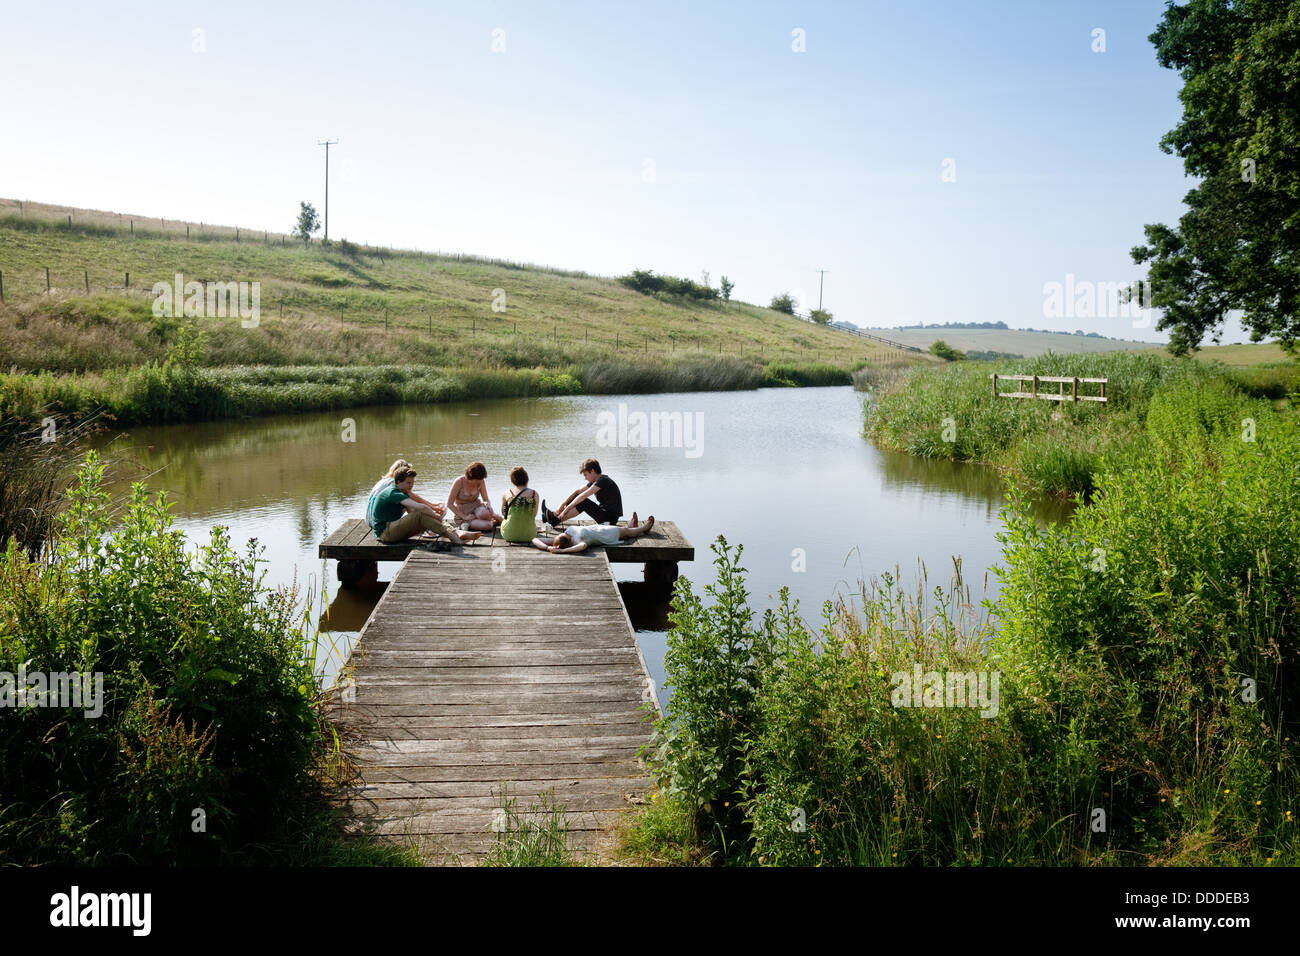 Young people sitting on a jetty by a lake in english countryside, Sheepdrove Organic Farm, Lambourn, Berkshire, UK Stock Photo